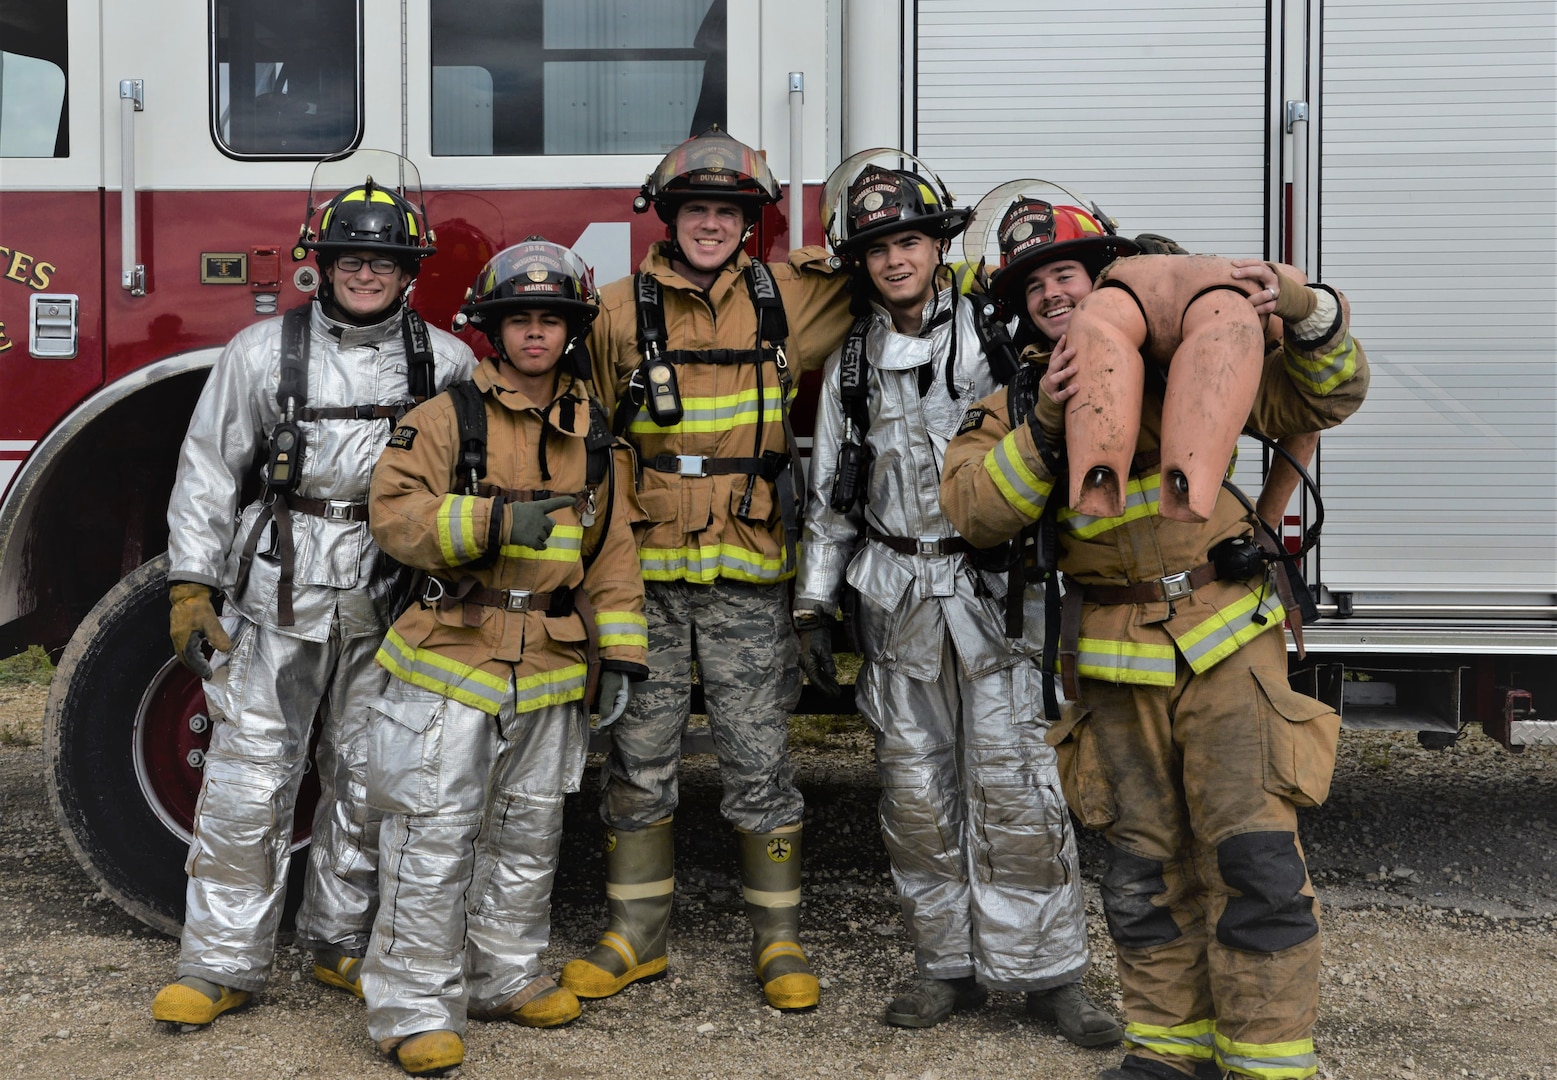 From left, Senior Airman Joshua Reeves, Airman 1st Class Jared Tajalle, Staff Sgt. Neal Kiser, A1C Eliot Elia and Senior Airman Patrick Sullivan make up the 902nd Security Forces Squadron five-man team that won the firefighter fitness challenge portion of the Battle of the Badges competition Oct. 20, 2018, at Joint Base San Antonio-Randolph’s Camp Talon. The initiative was designed to build stronger bonds between the agencies and has become a tradition for the unit members, their families and friends.